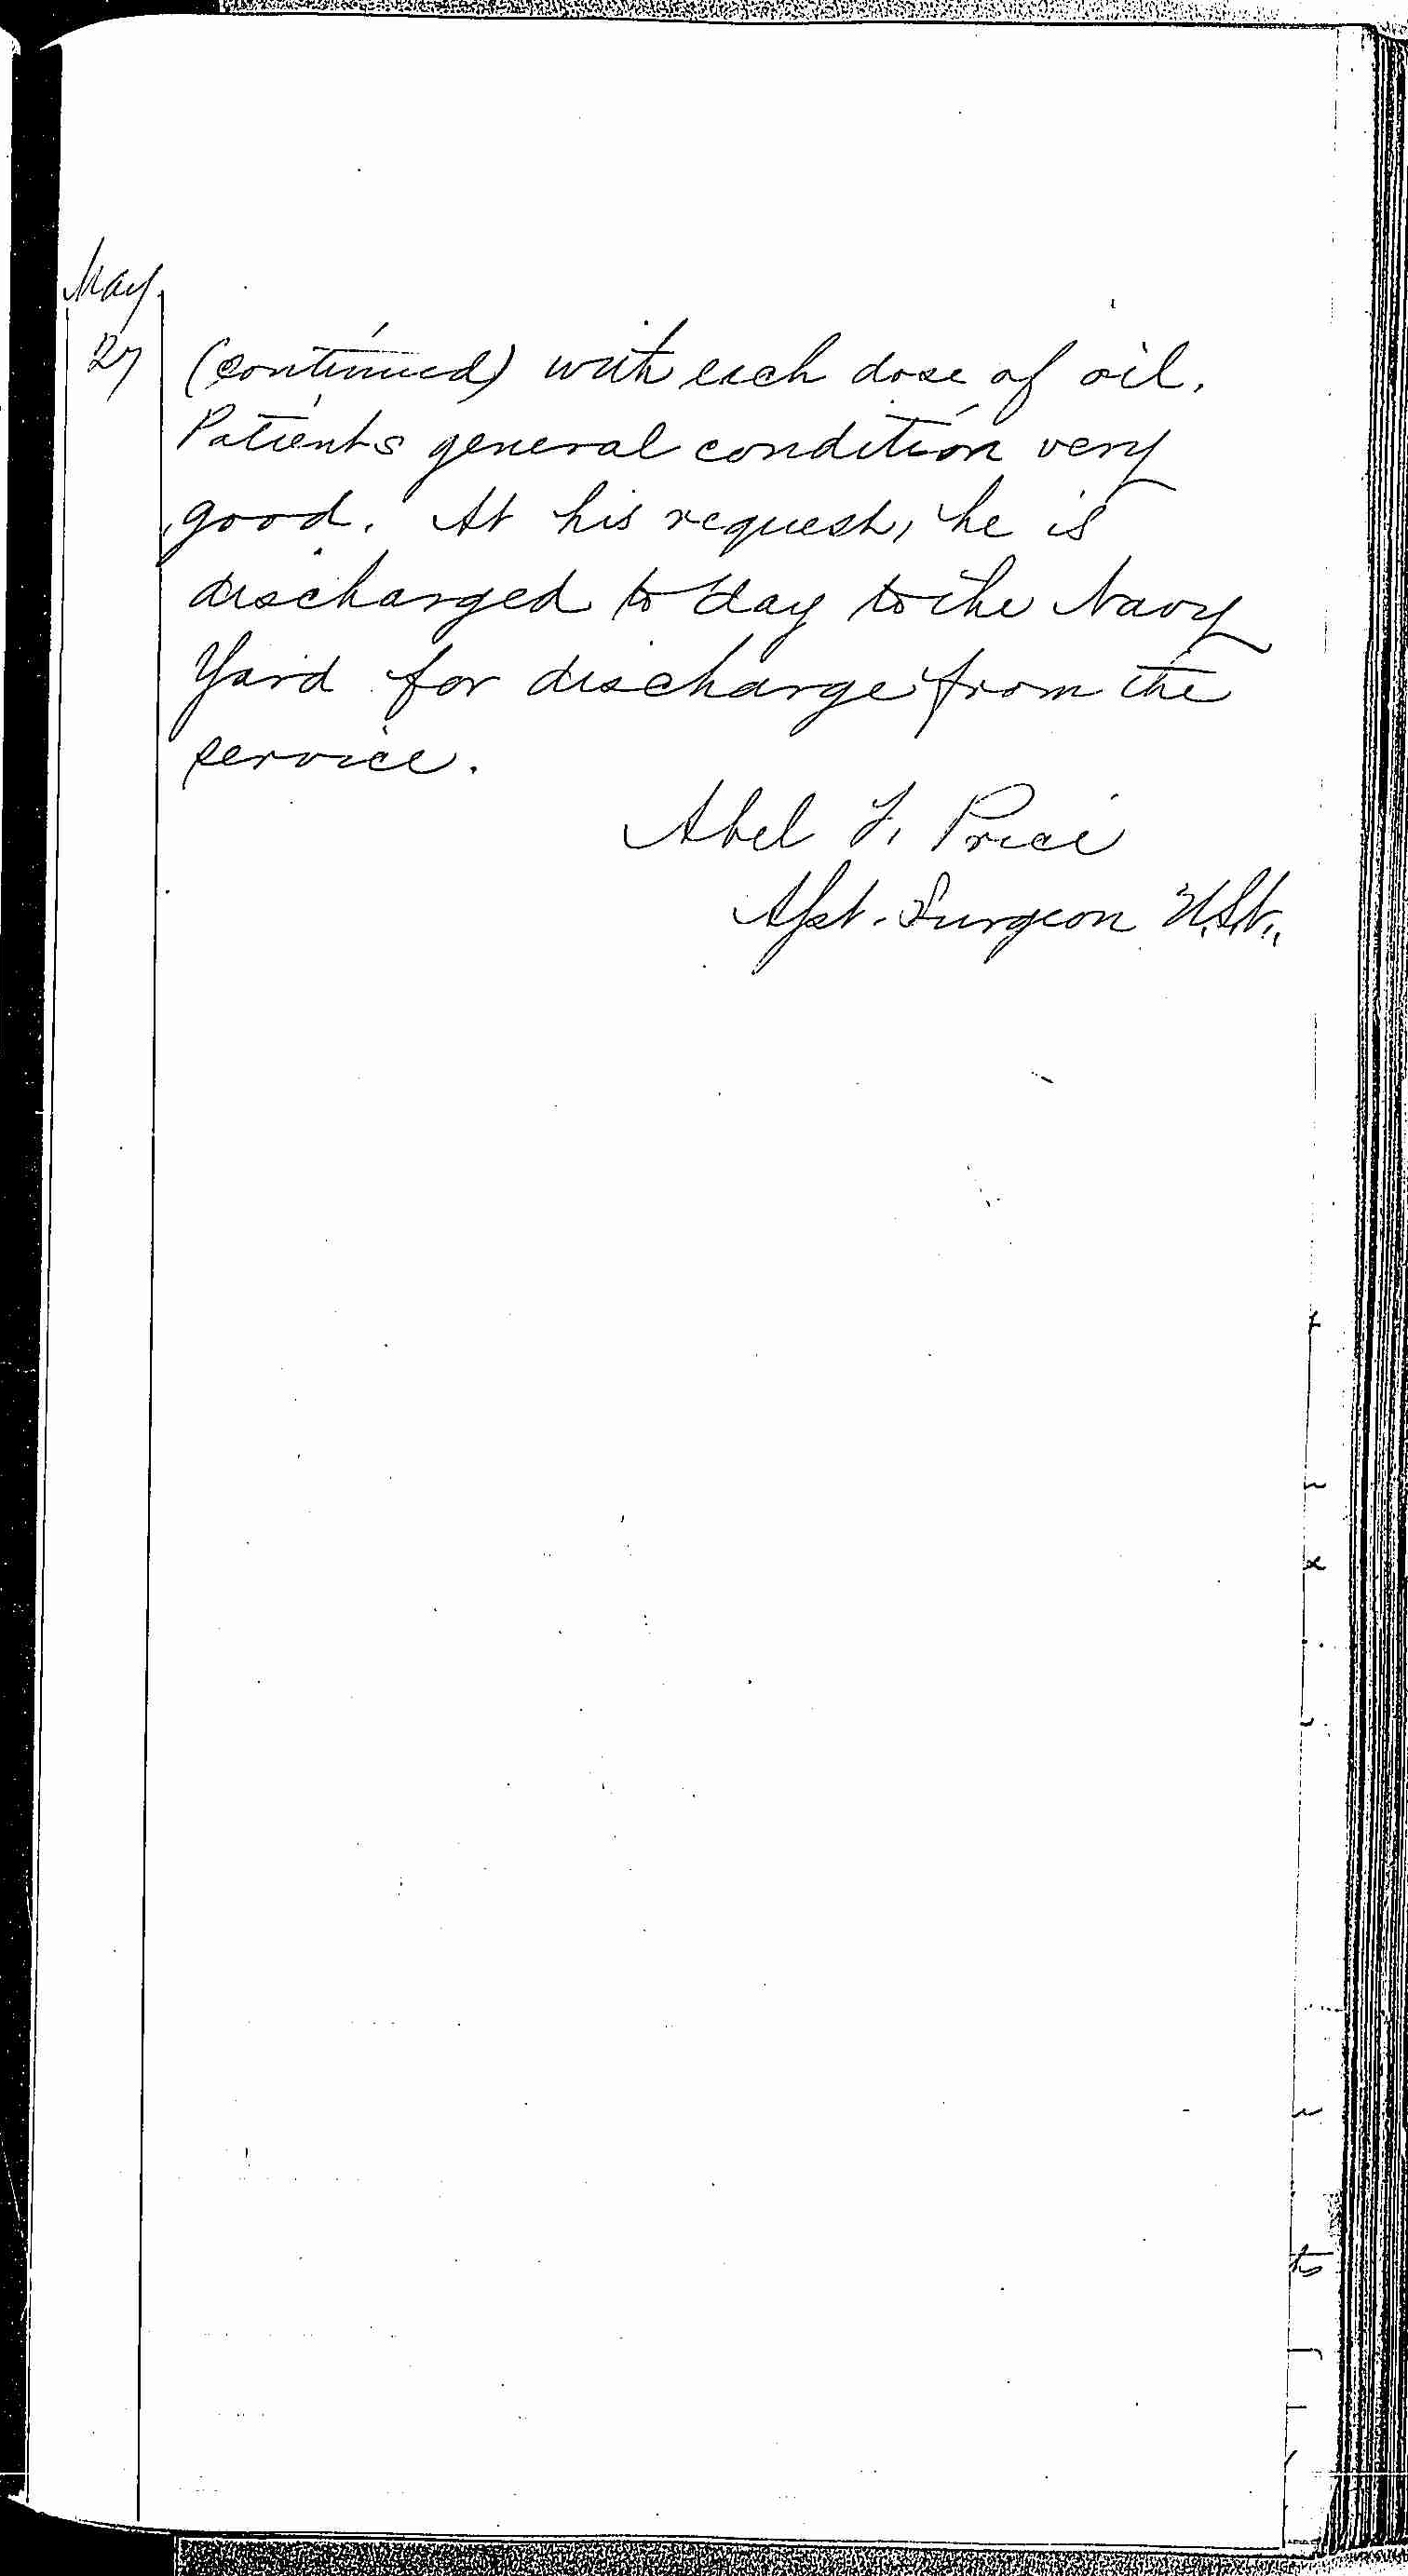 Entry for Richard Forn (page 21 of 21) in the log Hospital Tickets and Case Papers - Naval Hospital - Washington, D.C. - 1868-69